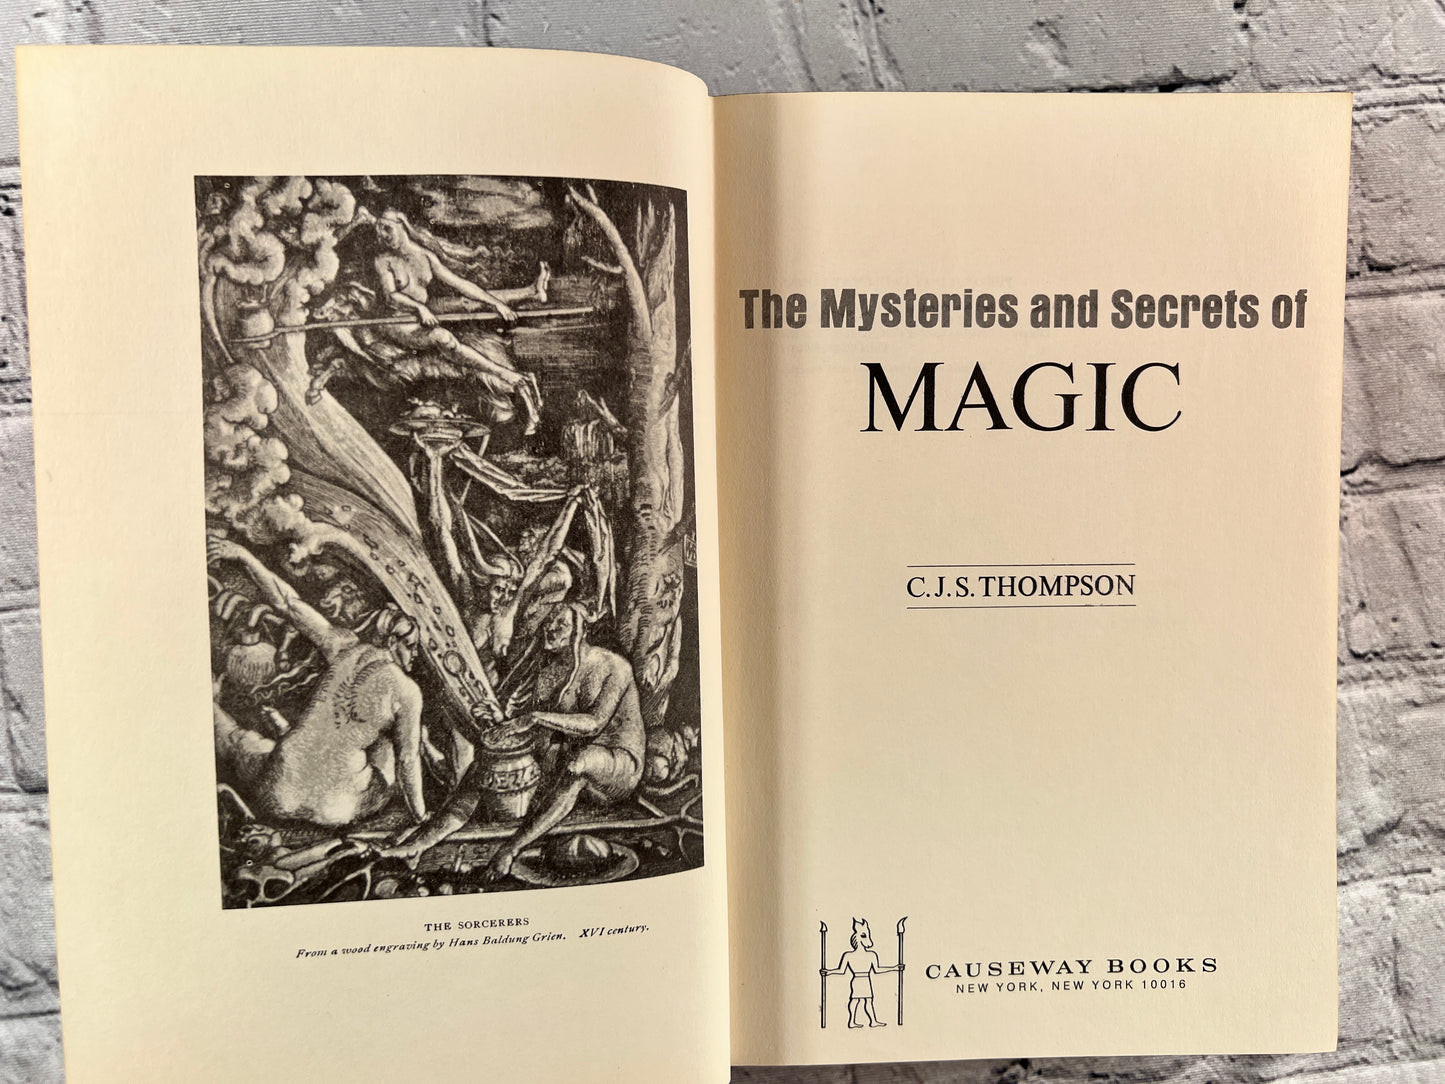 The Mysteries and Secrets of Magic by C.J.S Thompson [1973]